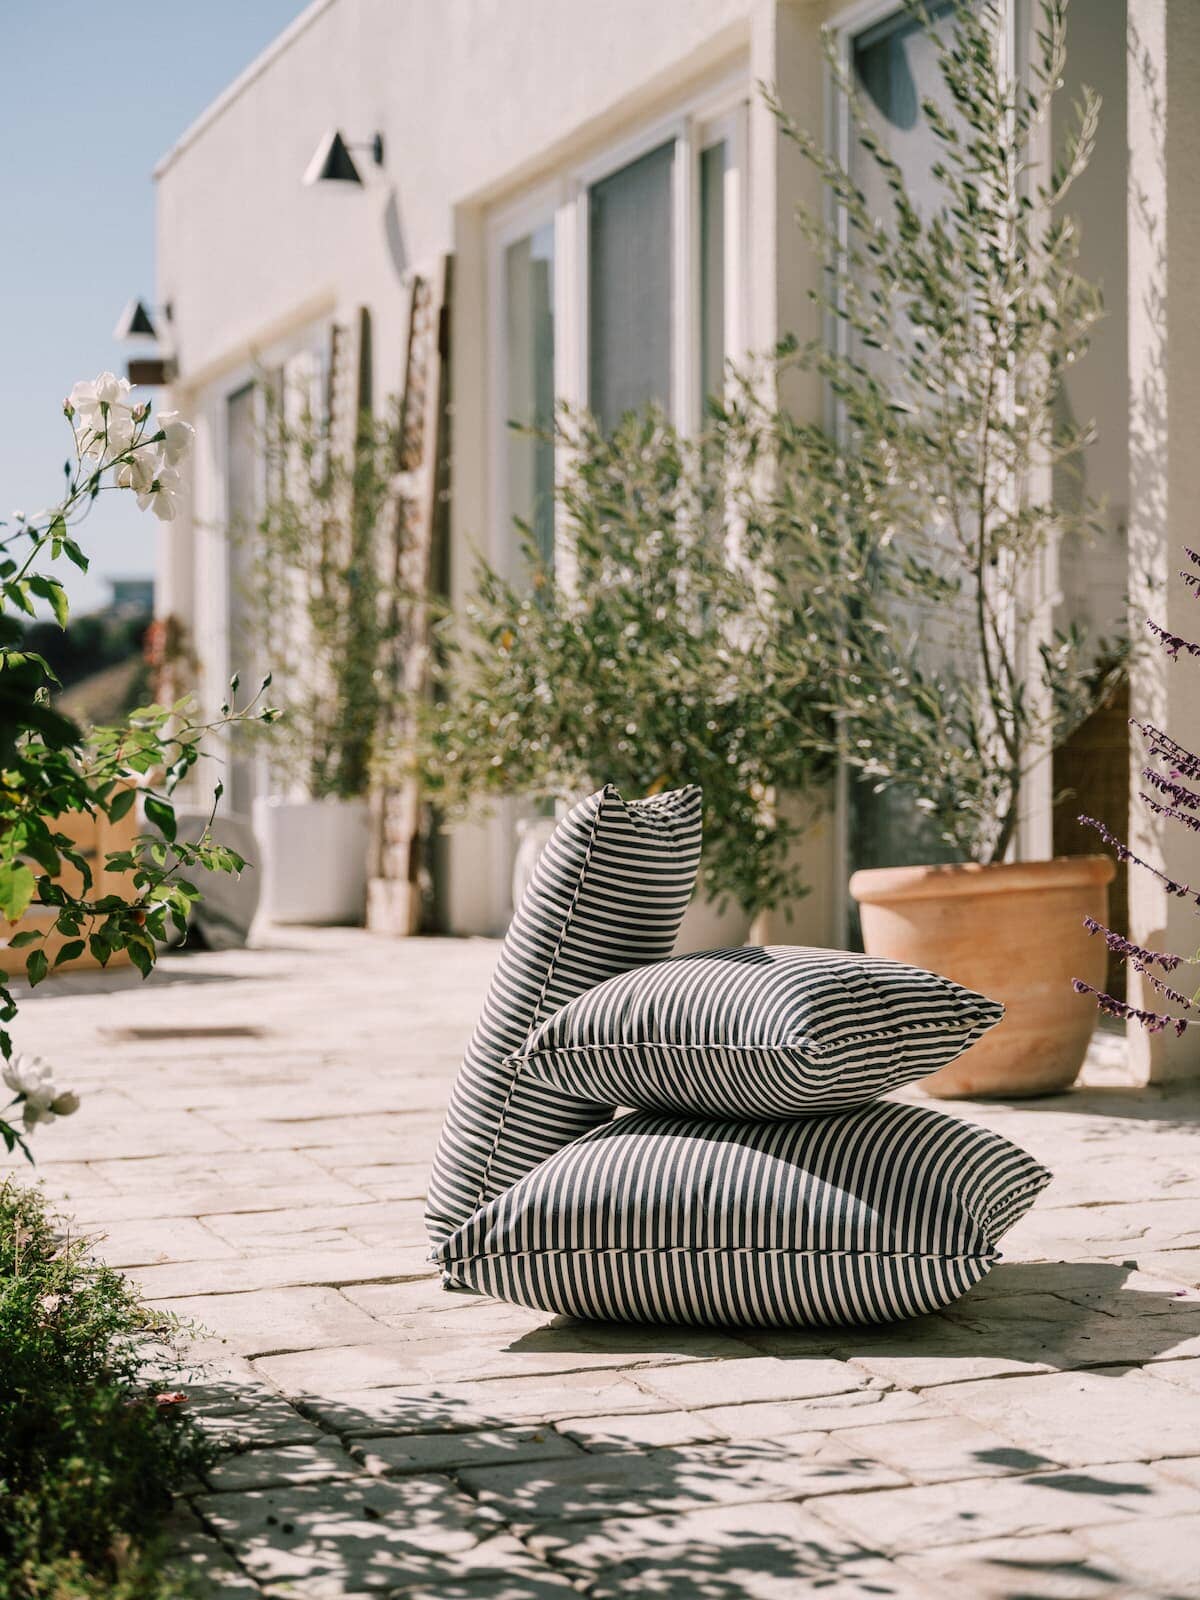 3 outdoor cushions stacked on a patio in the sun